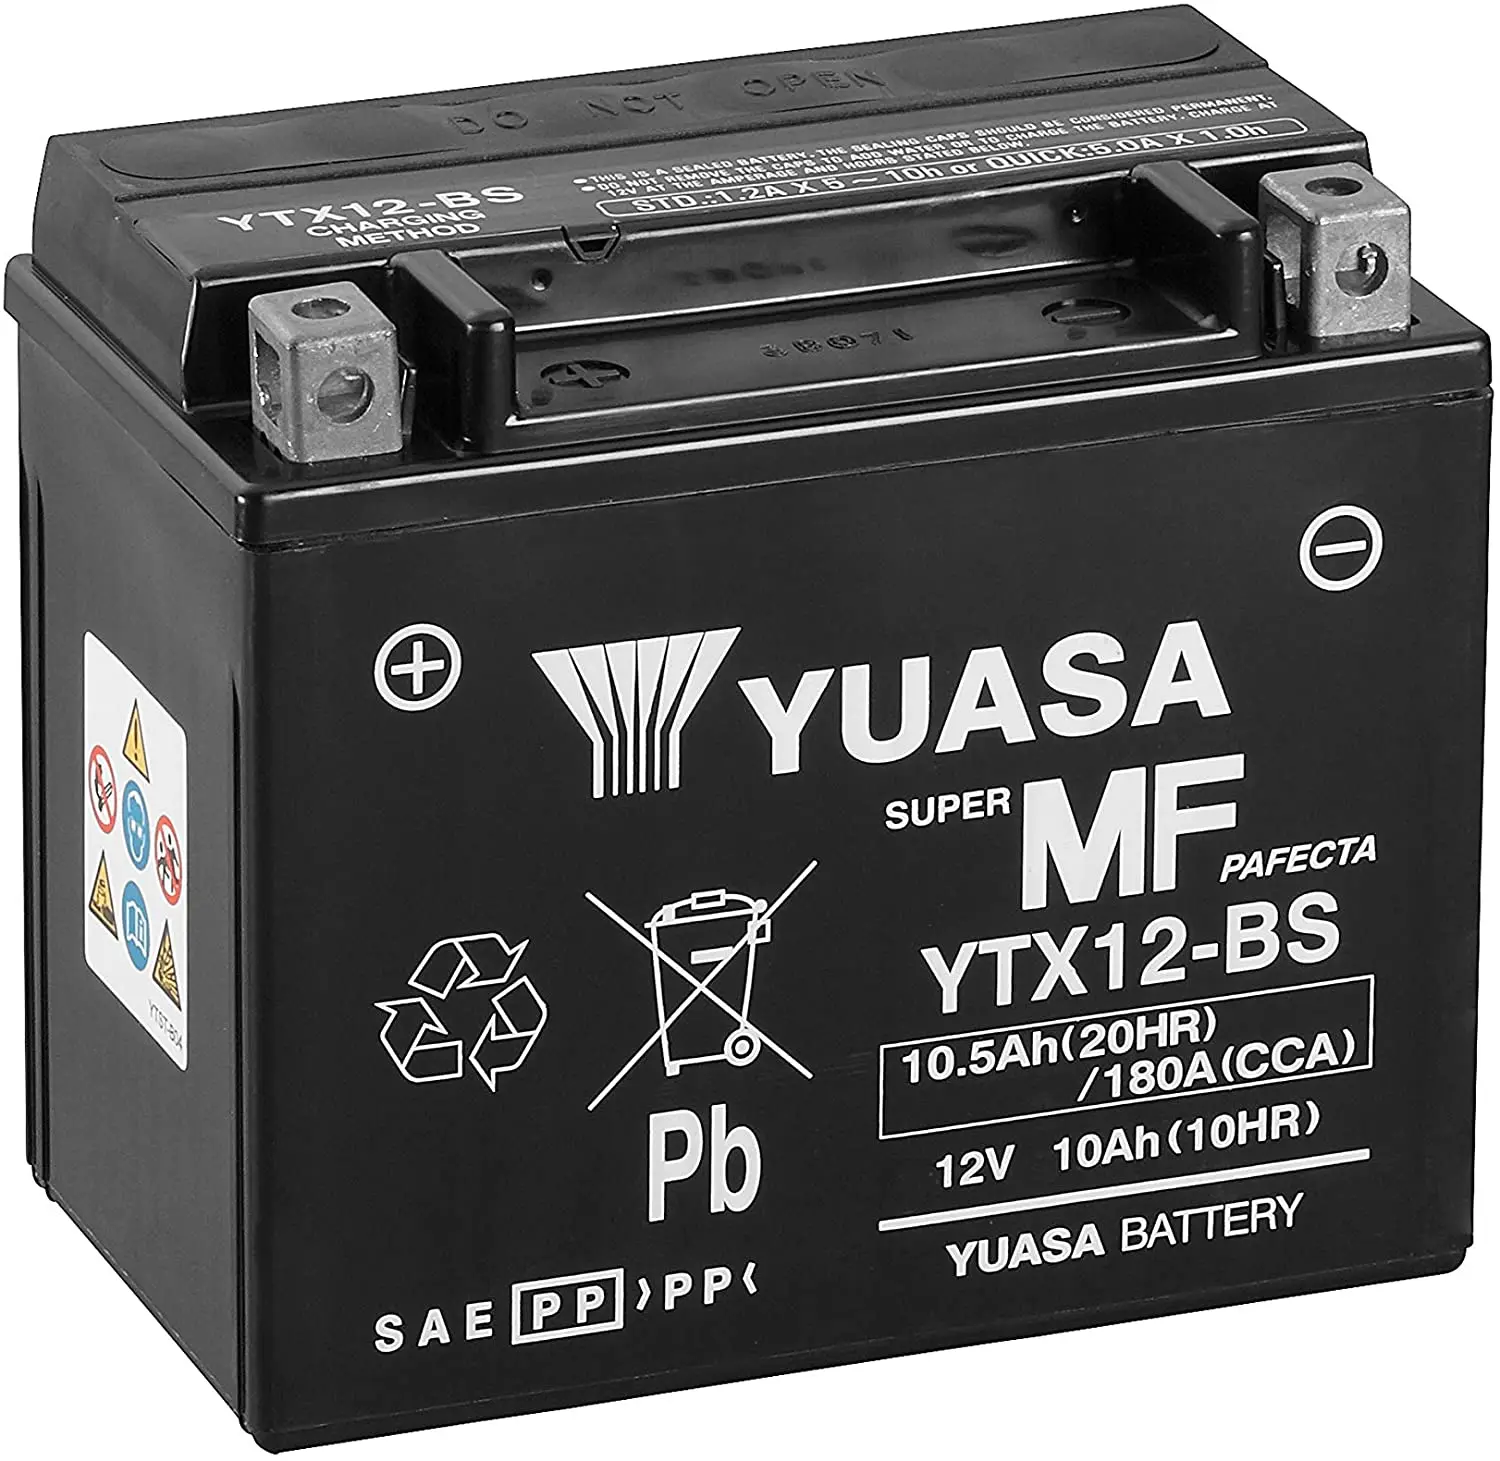 Yuasa YTX12-BS, battery with acid pack, 12V voltage, 10Ah, dimensions  15x8.7x13 cm, AGM lead technology